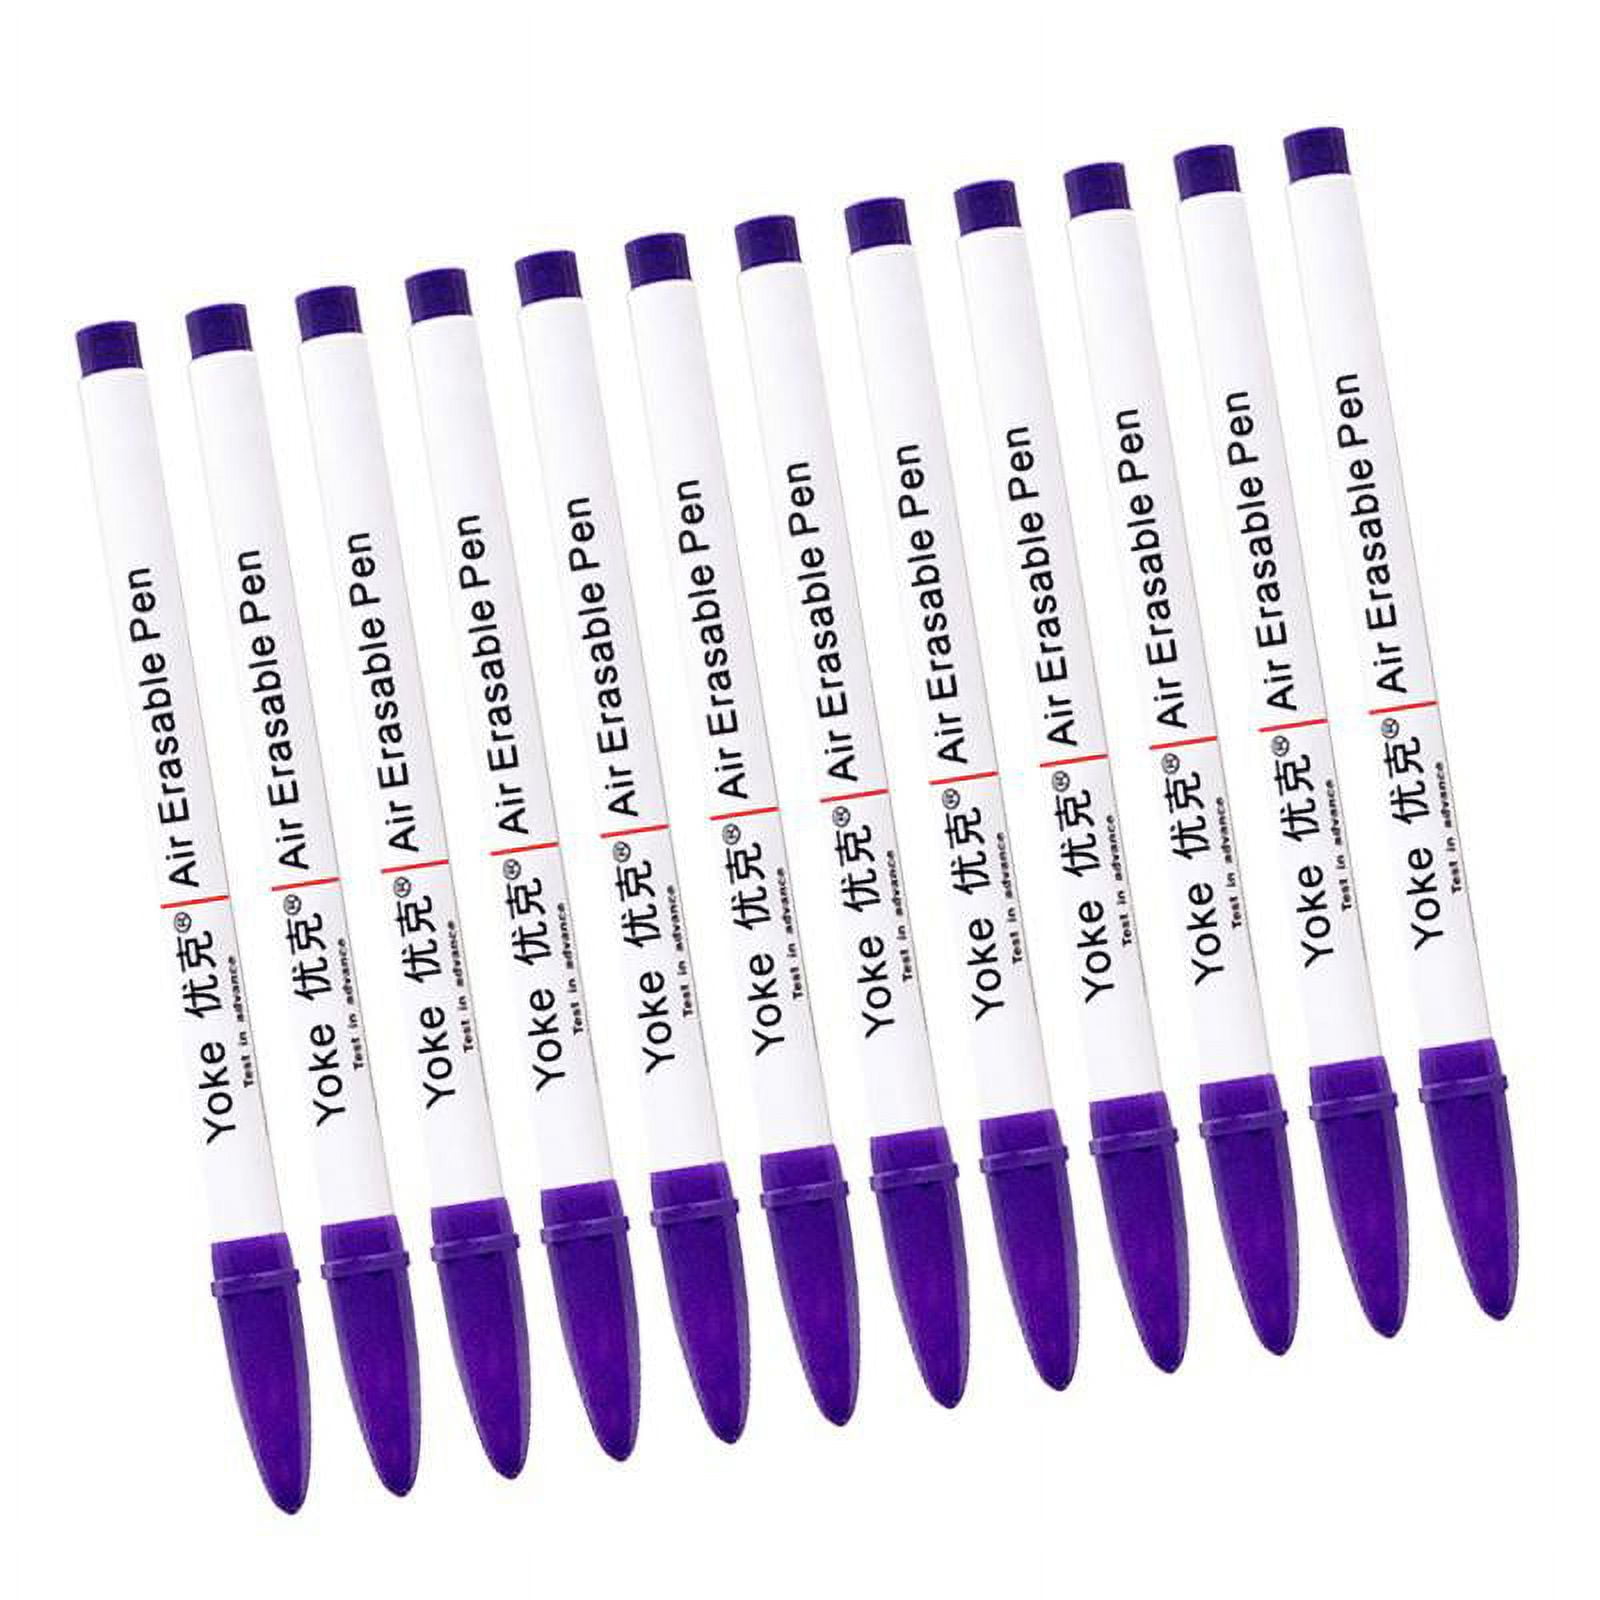 12pcs Fabric Marker Hydrolysis Water Soluble Pen Automatically Fade  Disappear Cancellation Pens Clothing Sewing Tool Accessory - Price history  & Review, AliExpress Seller - Shop4375021 Store